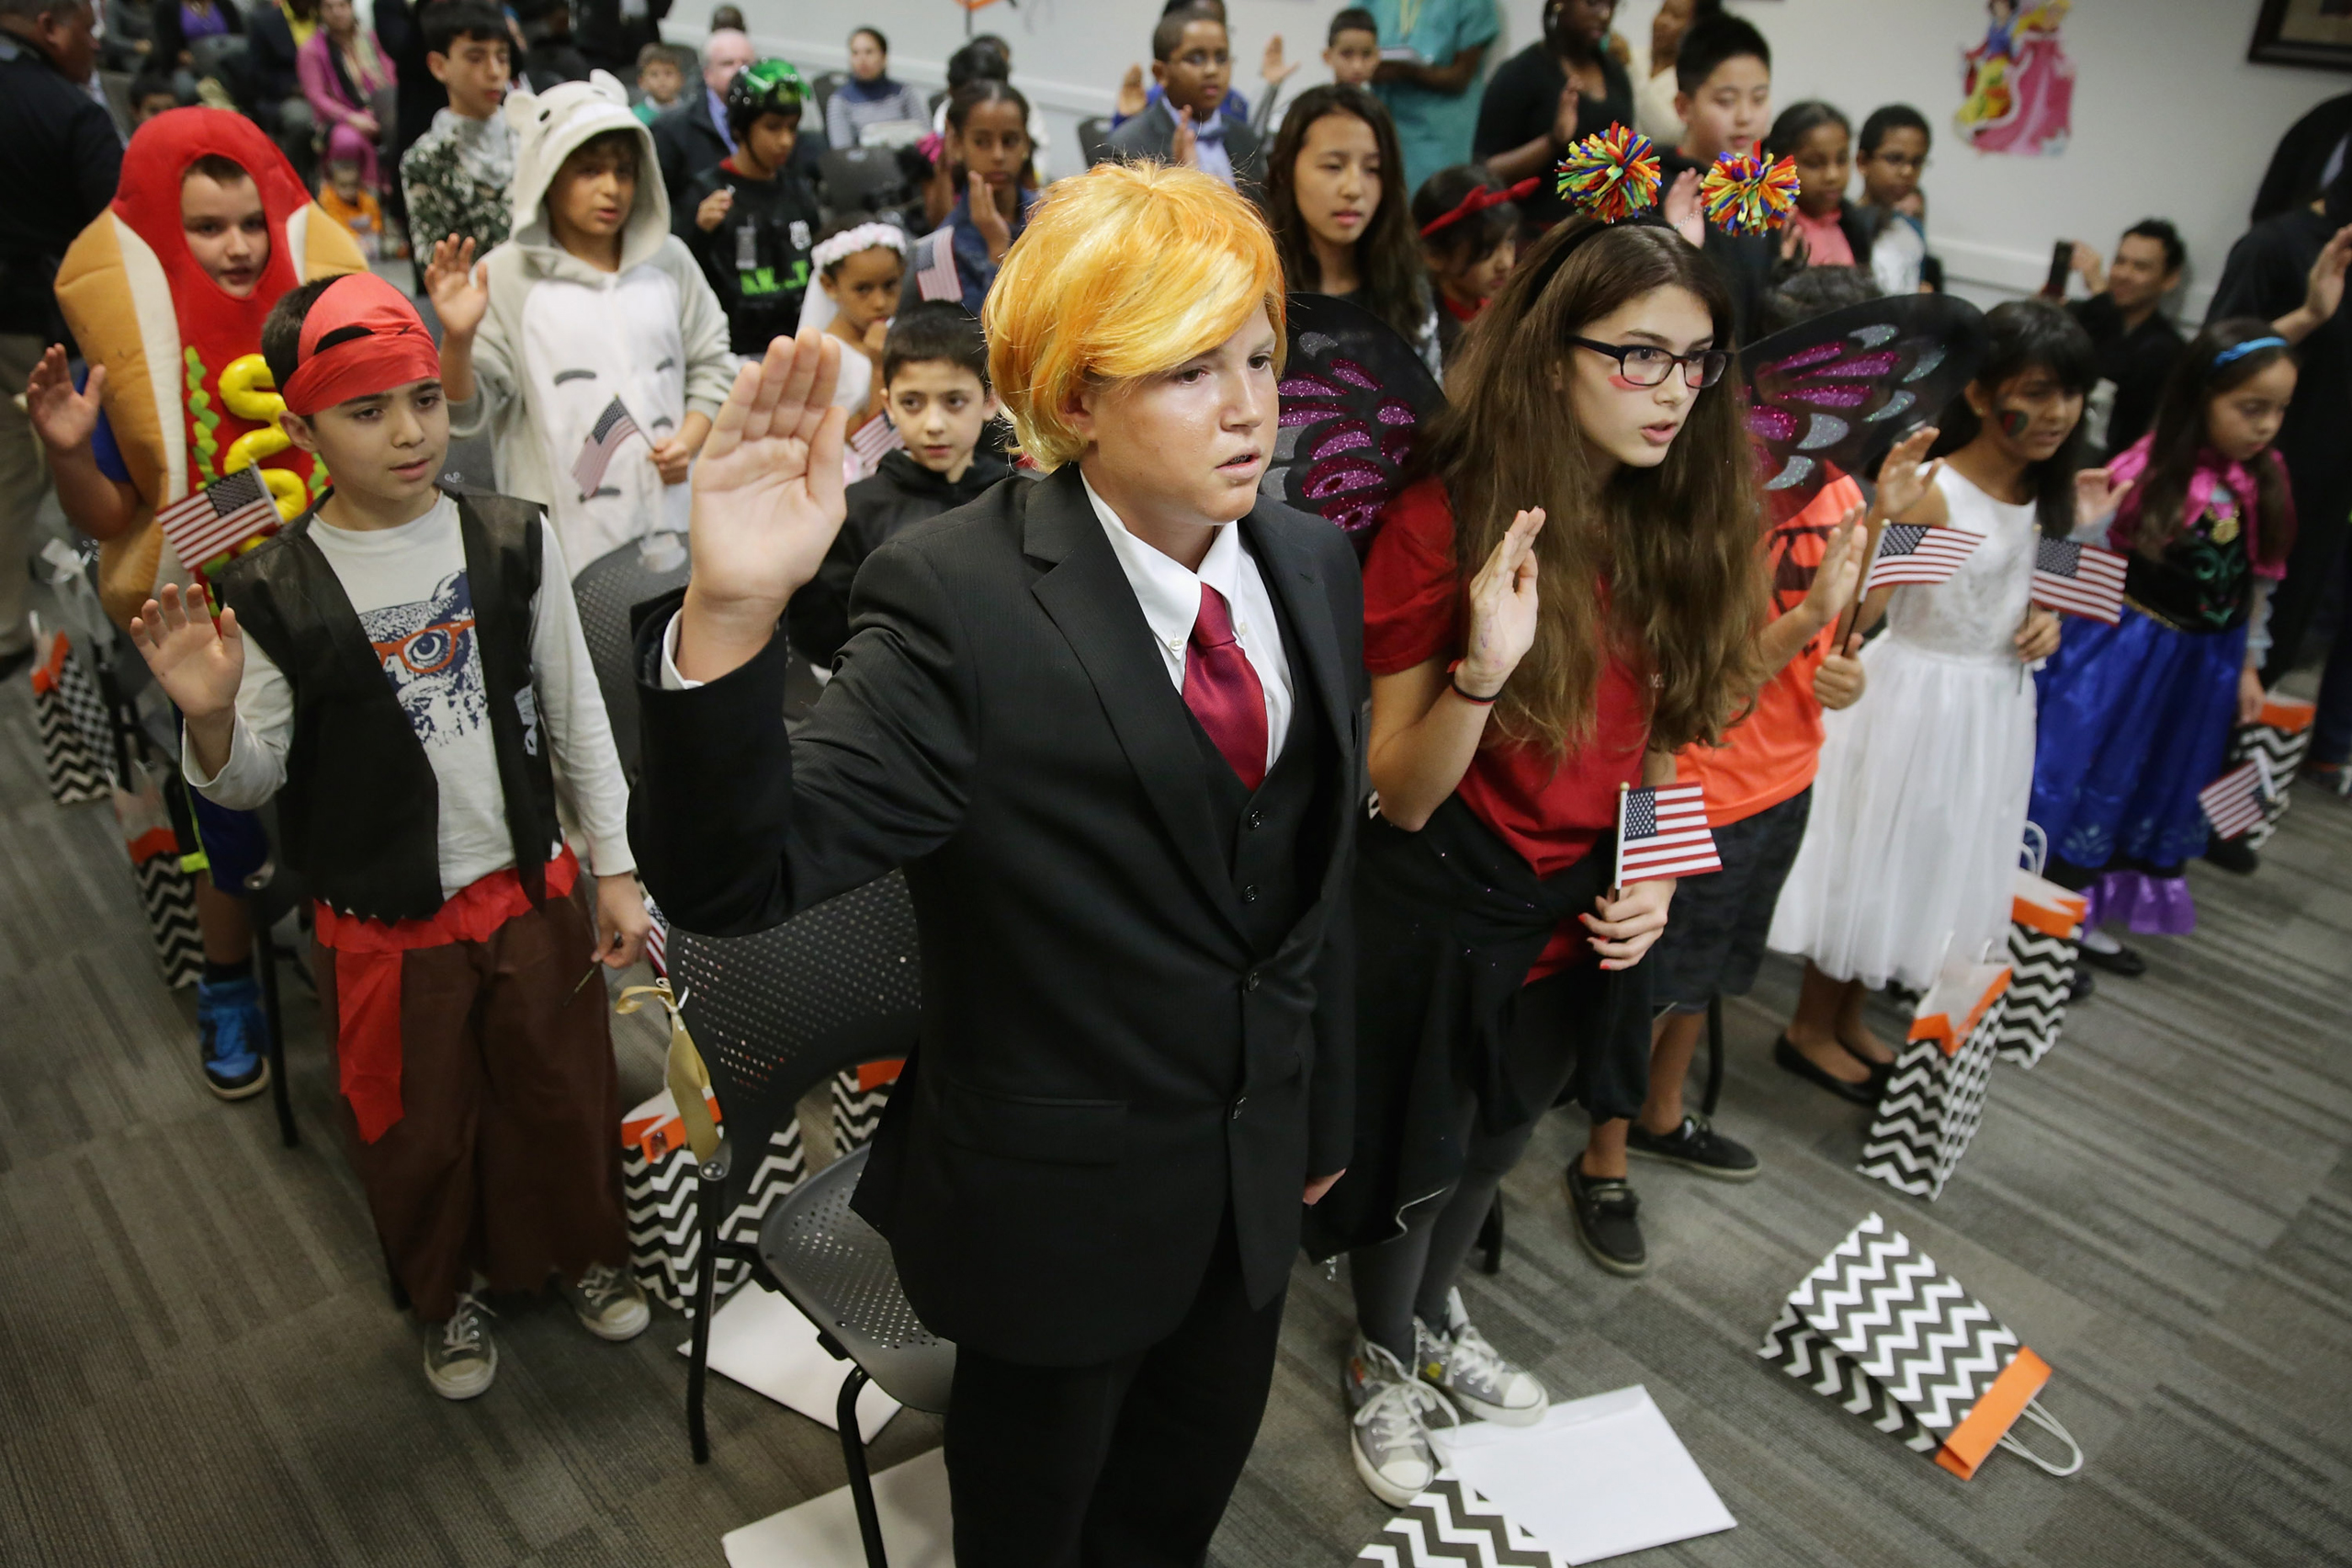 Dressed as  Donald Trump, 13-year-old Razvan Godja (C) and 26 other children wear Halloween costumes as they take the Oath of Allegiance during their naturalization ceremony at the U.S. Citizen and Immigration Services Washington Field Office on Oct. 30, 2015. Godja, who was born in Romania, and the other children became some of the United States' youngest and newest citizens on the day before heading out for the American tradition of trick-or-treating.